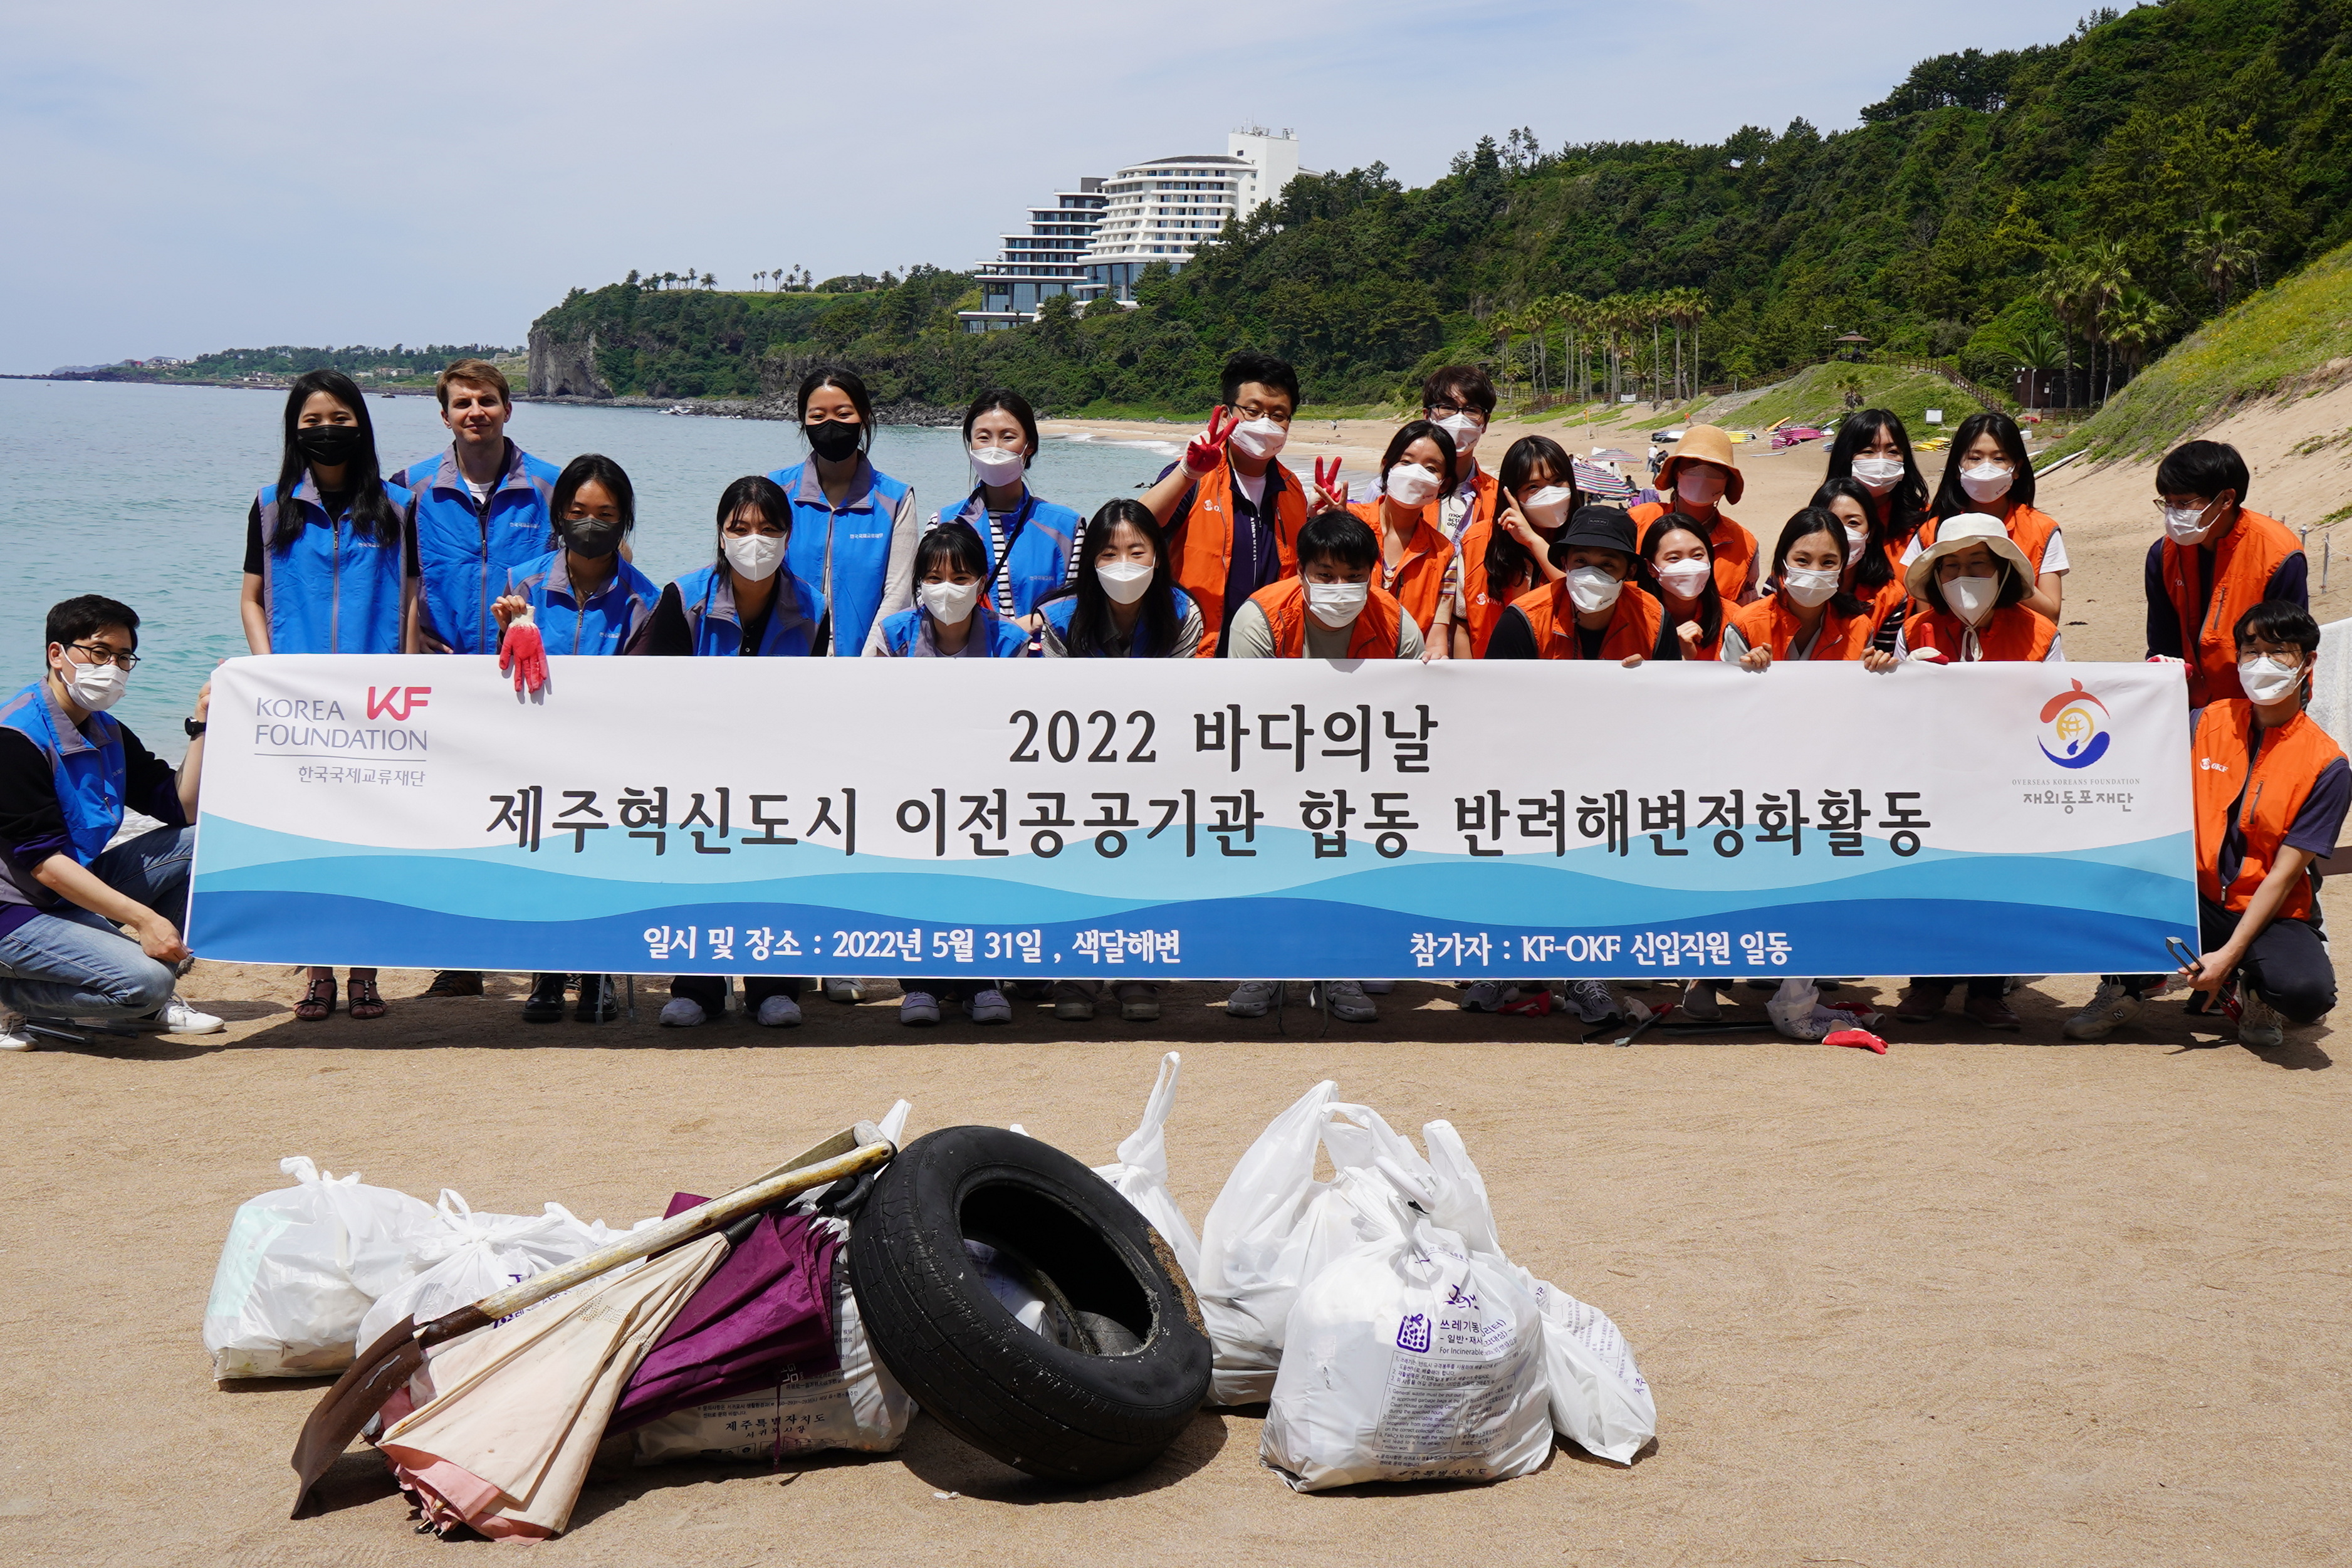 Group photograph of staff of the OKF and KF who participated in joint beach cleanup efforts